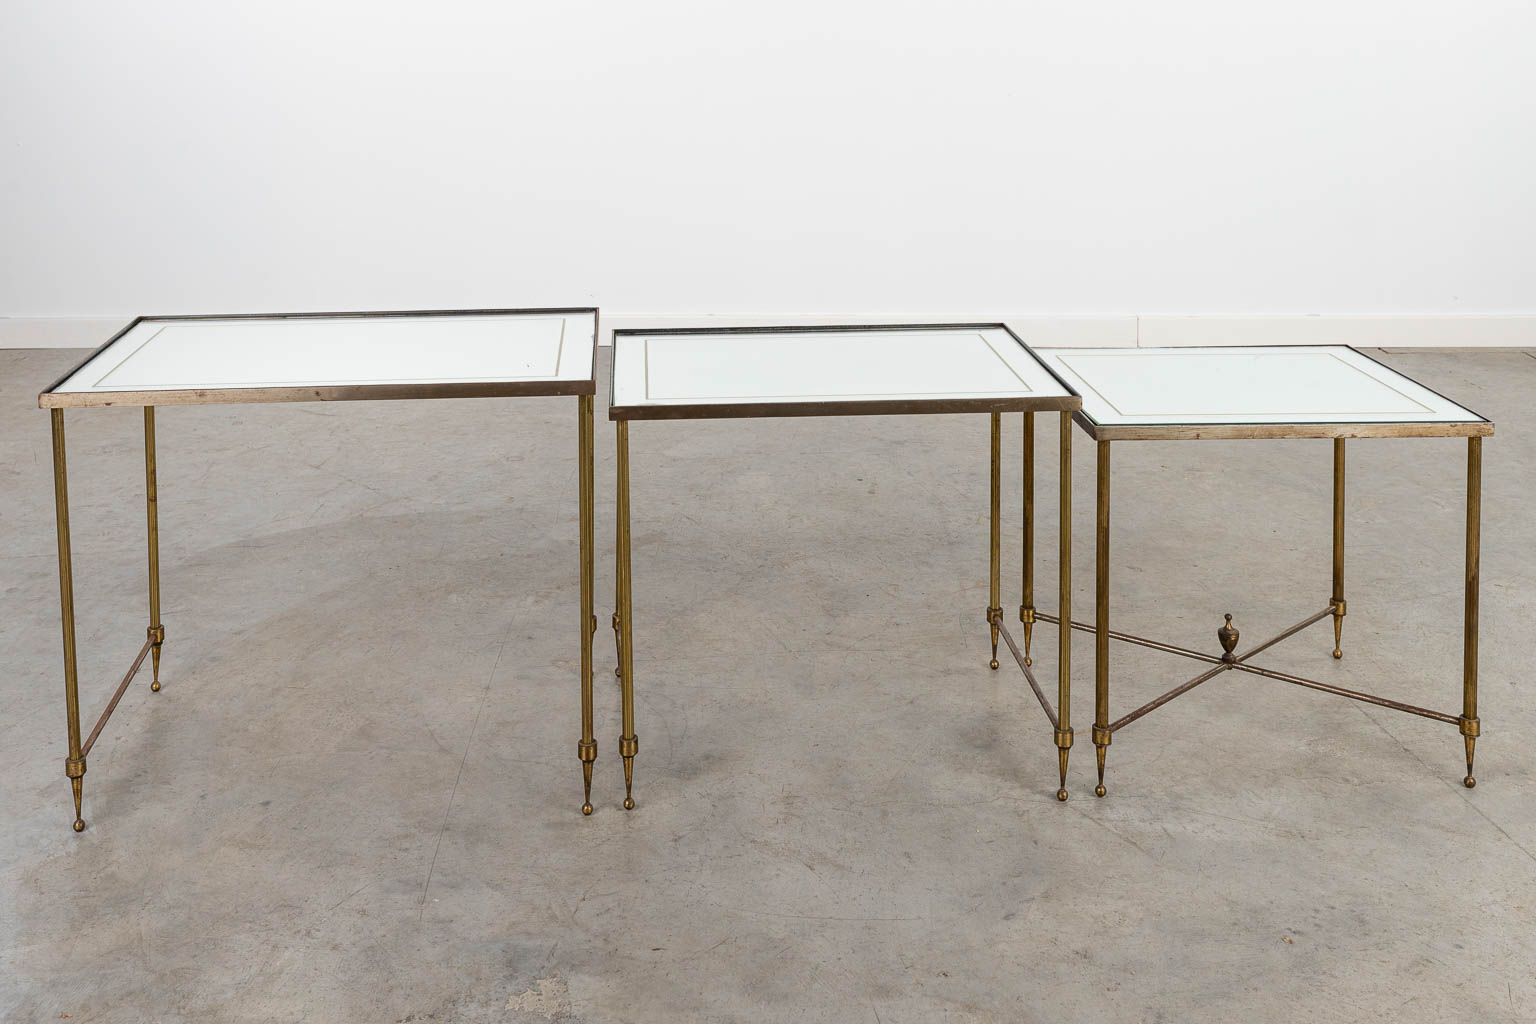 A collection of 3 coffee tables, made of brass and glass, in the style of Maison Jansen. (H:45cm)